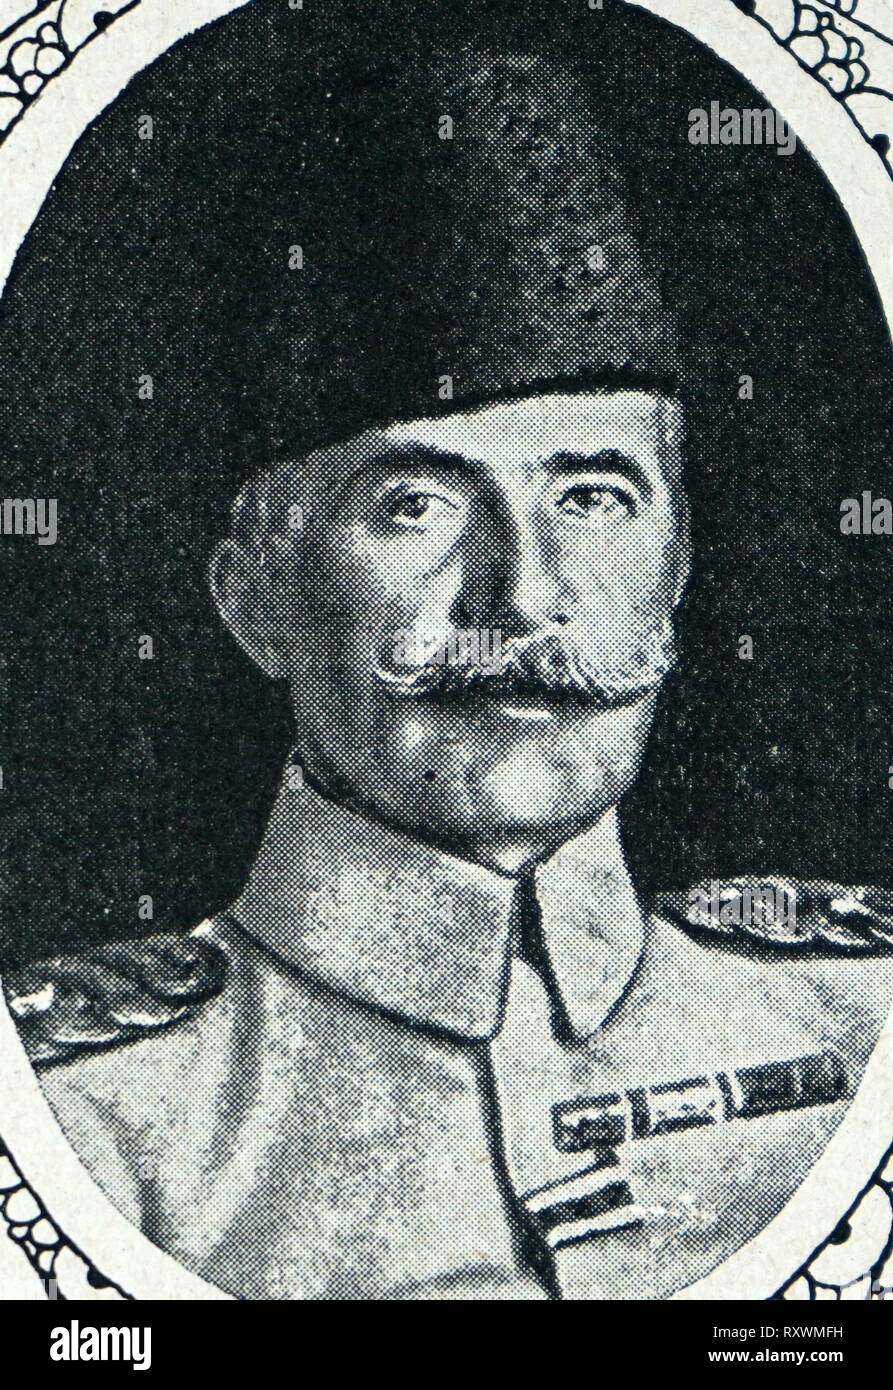 Mehmed Esad Pasha (1862 - 1952), known as Mehmet Esat Bulkat after the 1934 Surname Law, was an Ottoman general active during the First Balkan War, where he led the Yanya Corps, and in World War I, where he was the senior Ottoman commander in the Dardanelles Campaign. Stock Photo